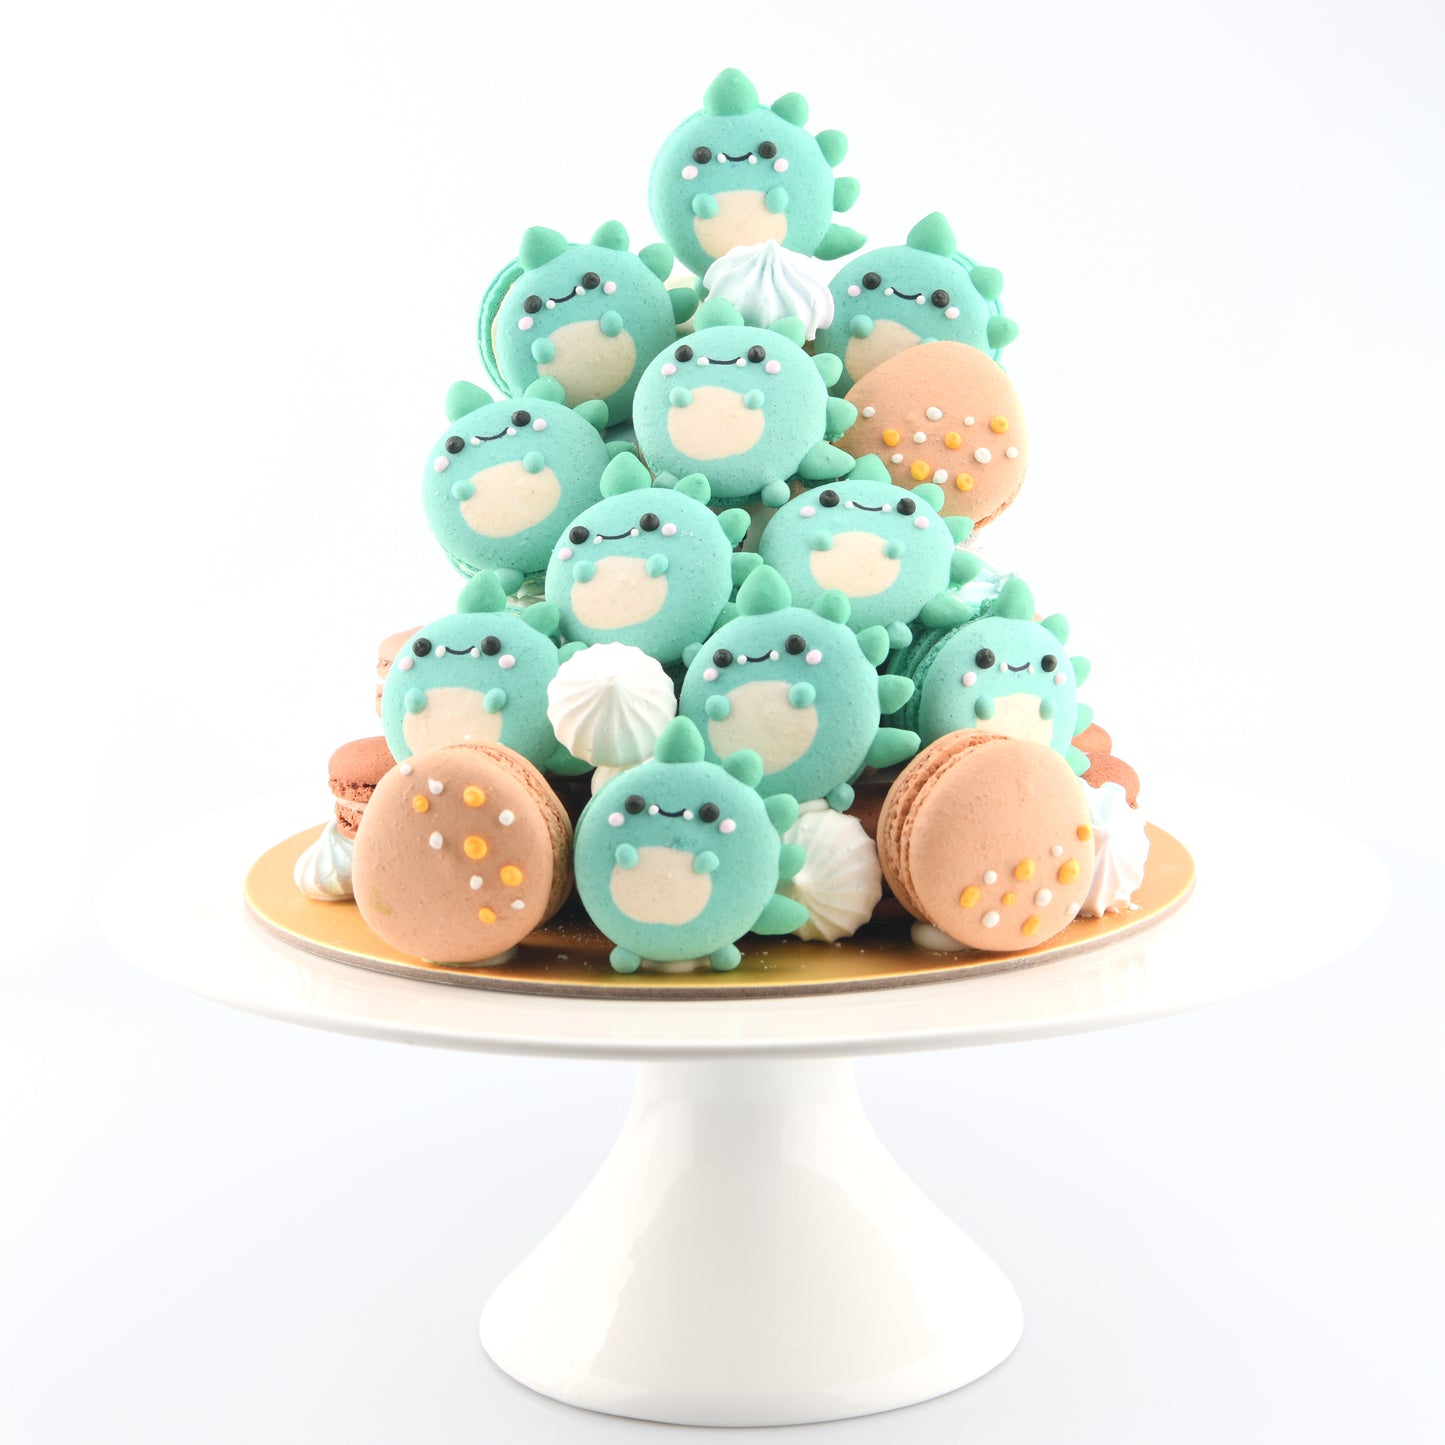 Dinosaur Macaron Tower |  43pcs Macarons Total in a Tower | $138 Only